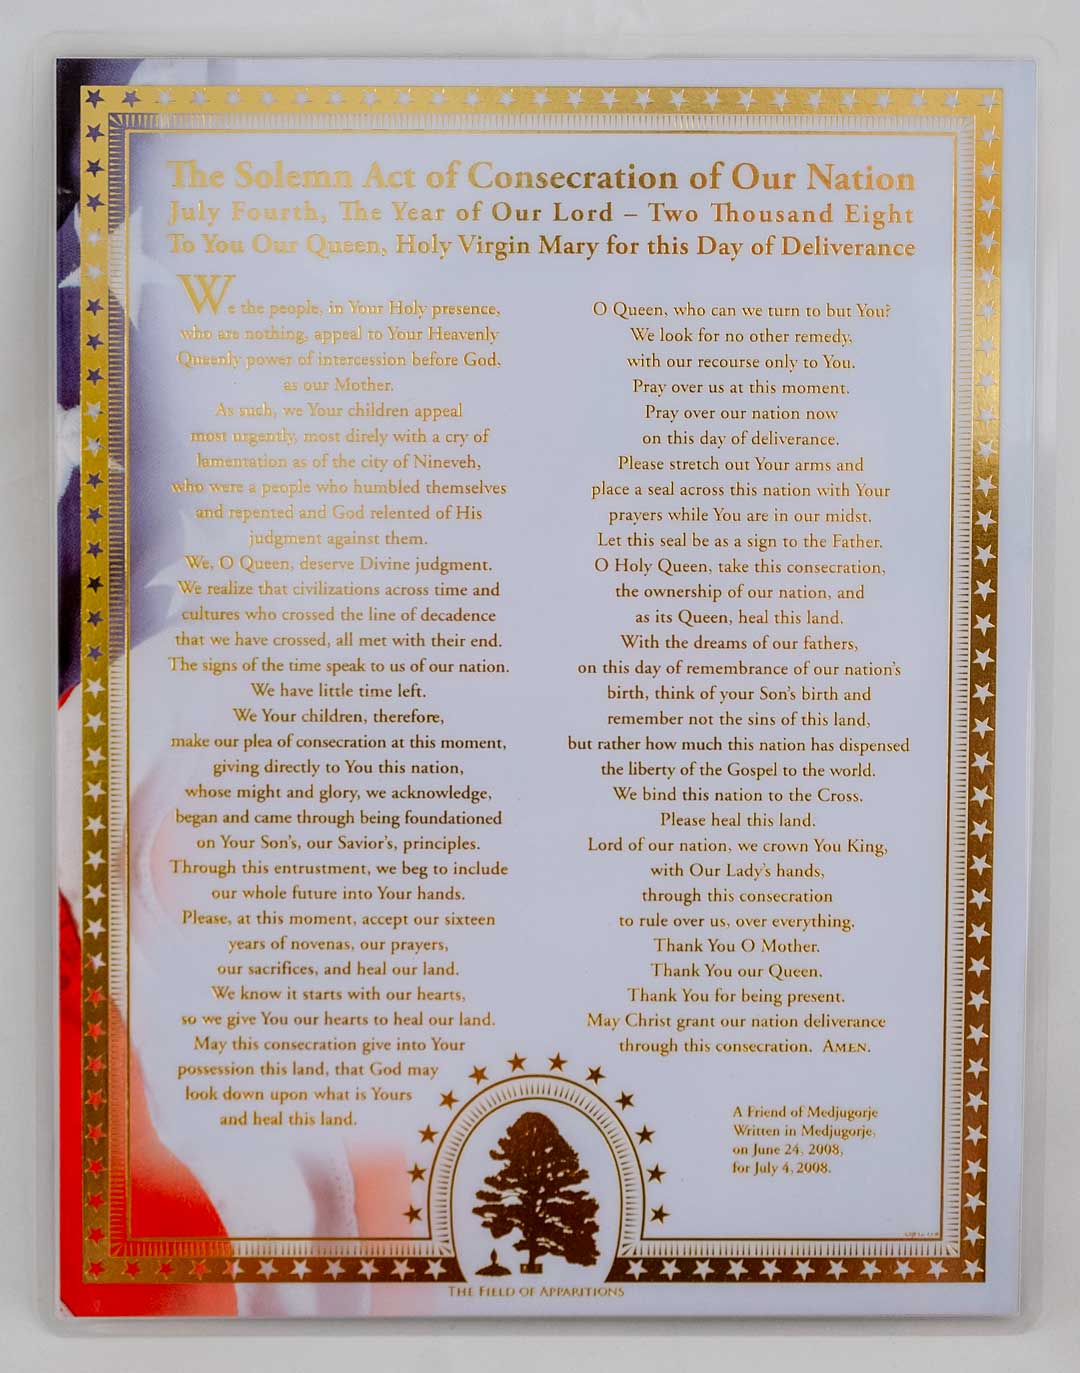 Solemn Act of Consecration of Our Nation